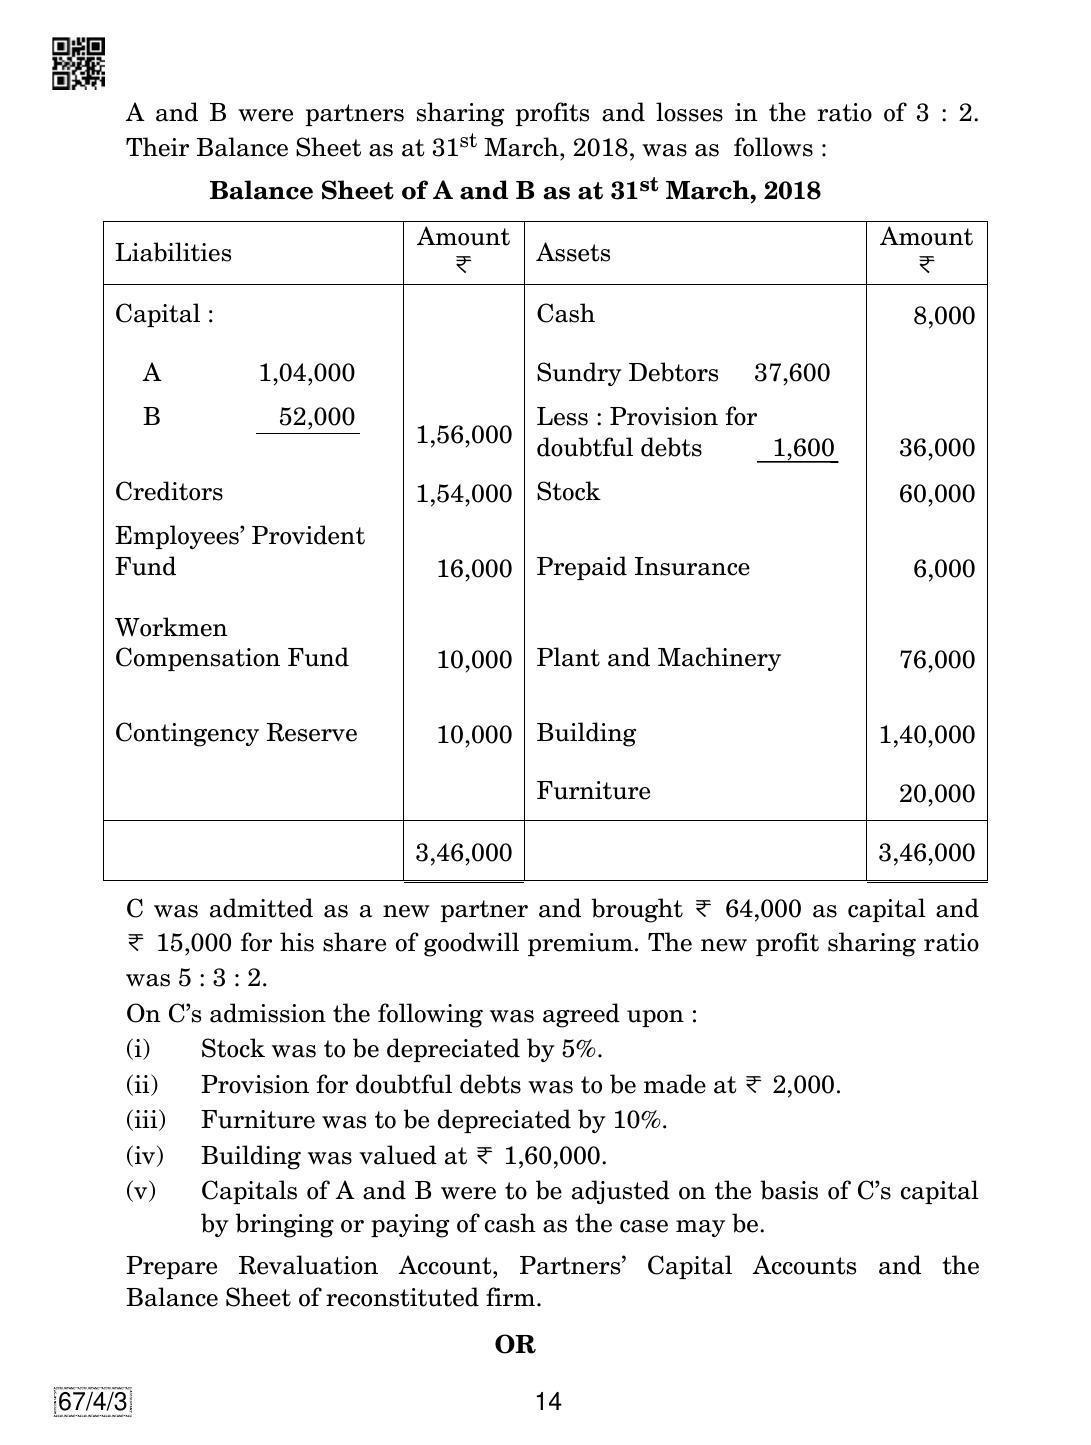 CBSE Class 12 67-4-3 Accountancy 2019 Question Paper - Page 14